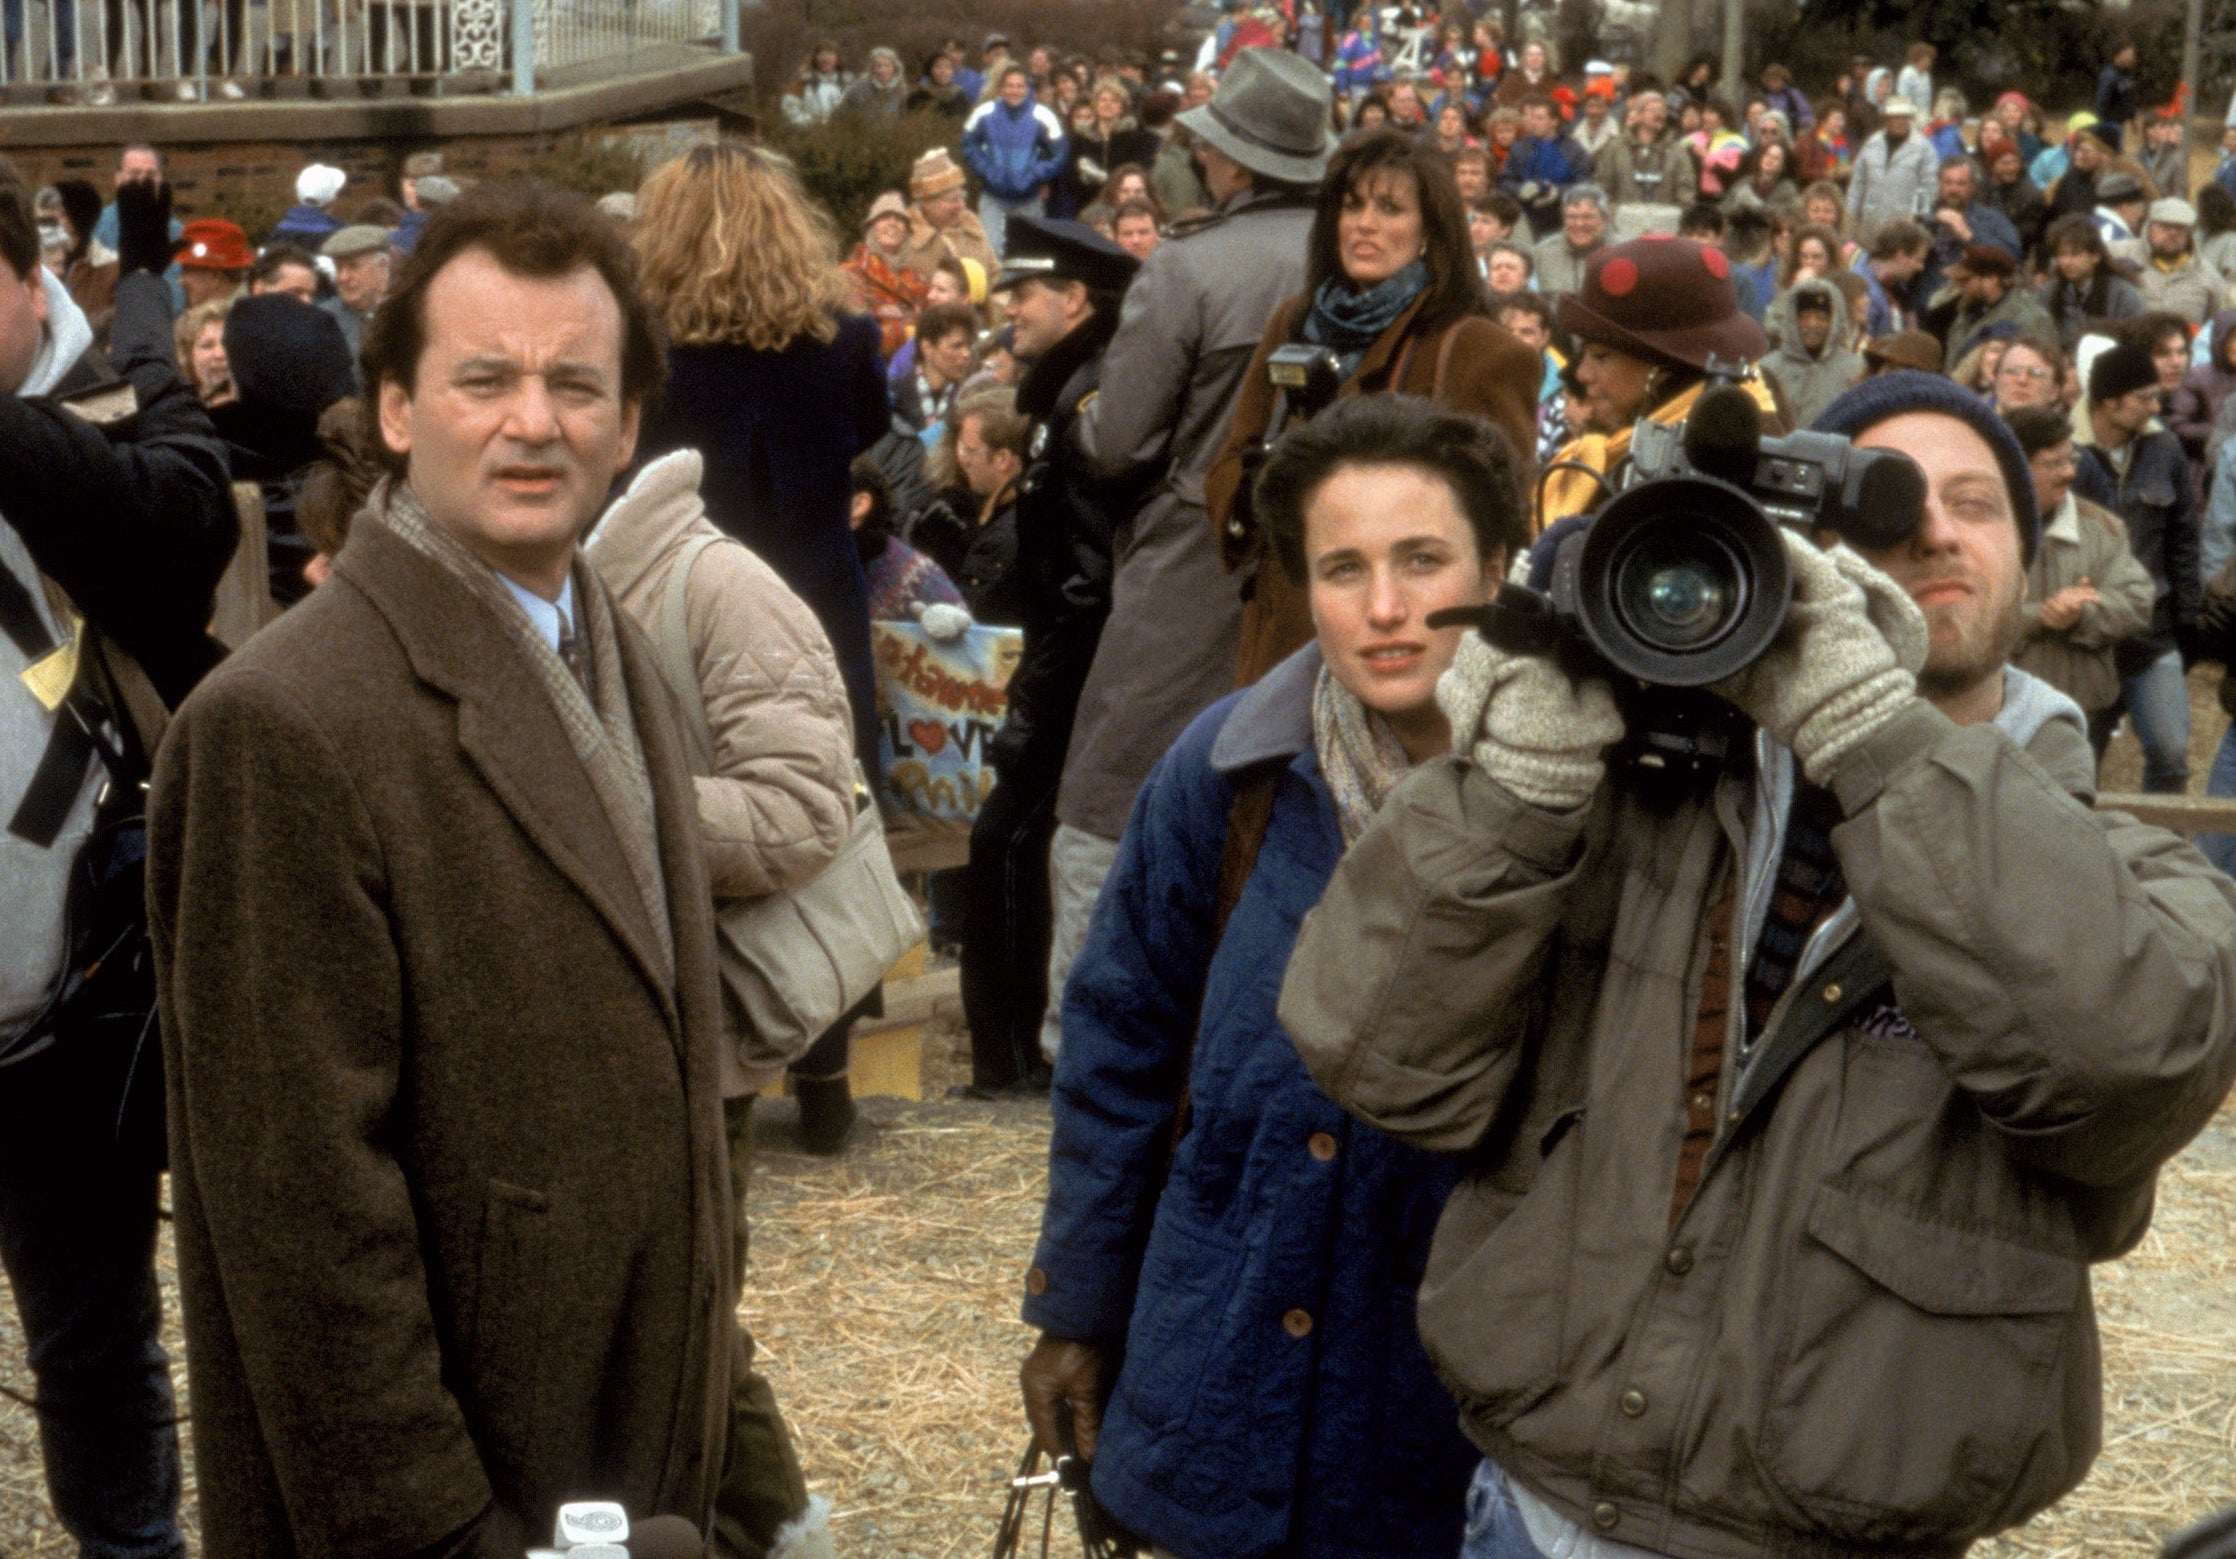 News reporters and Bill Murray and Andie MacDowell in a crowd